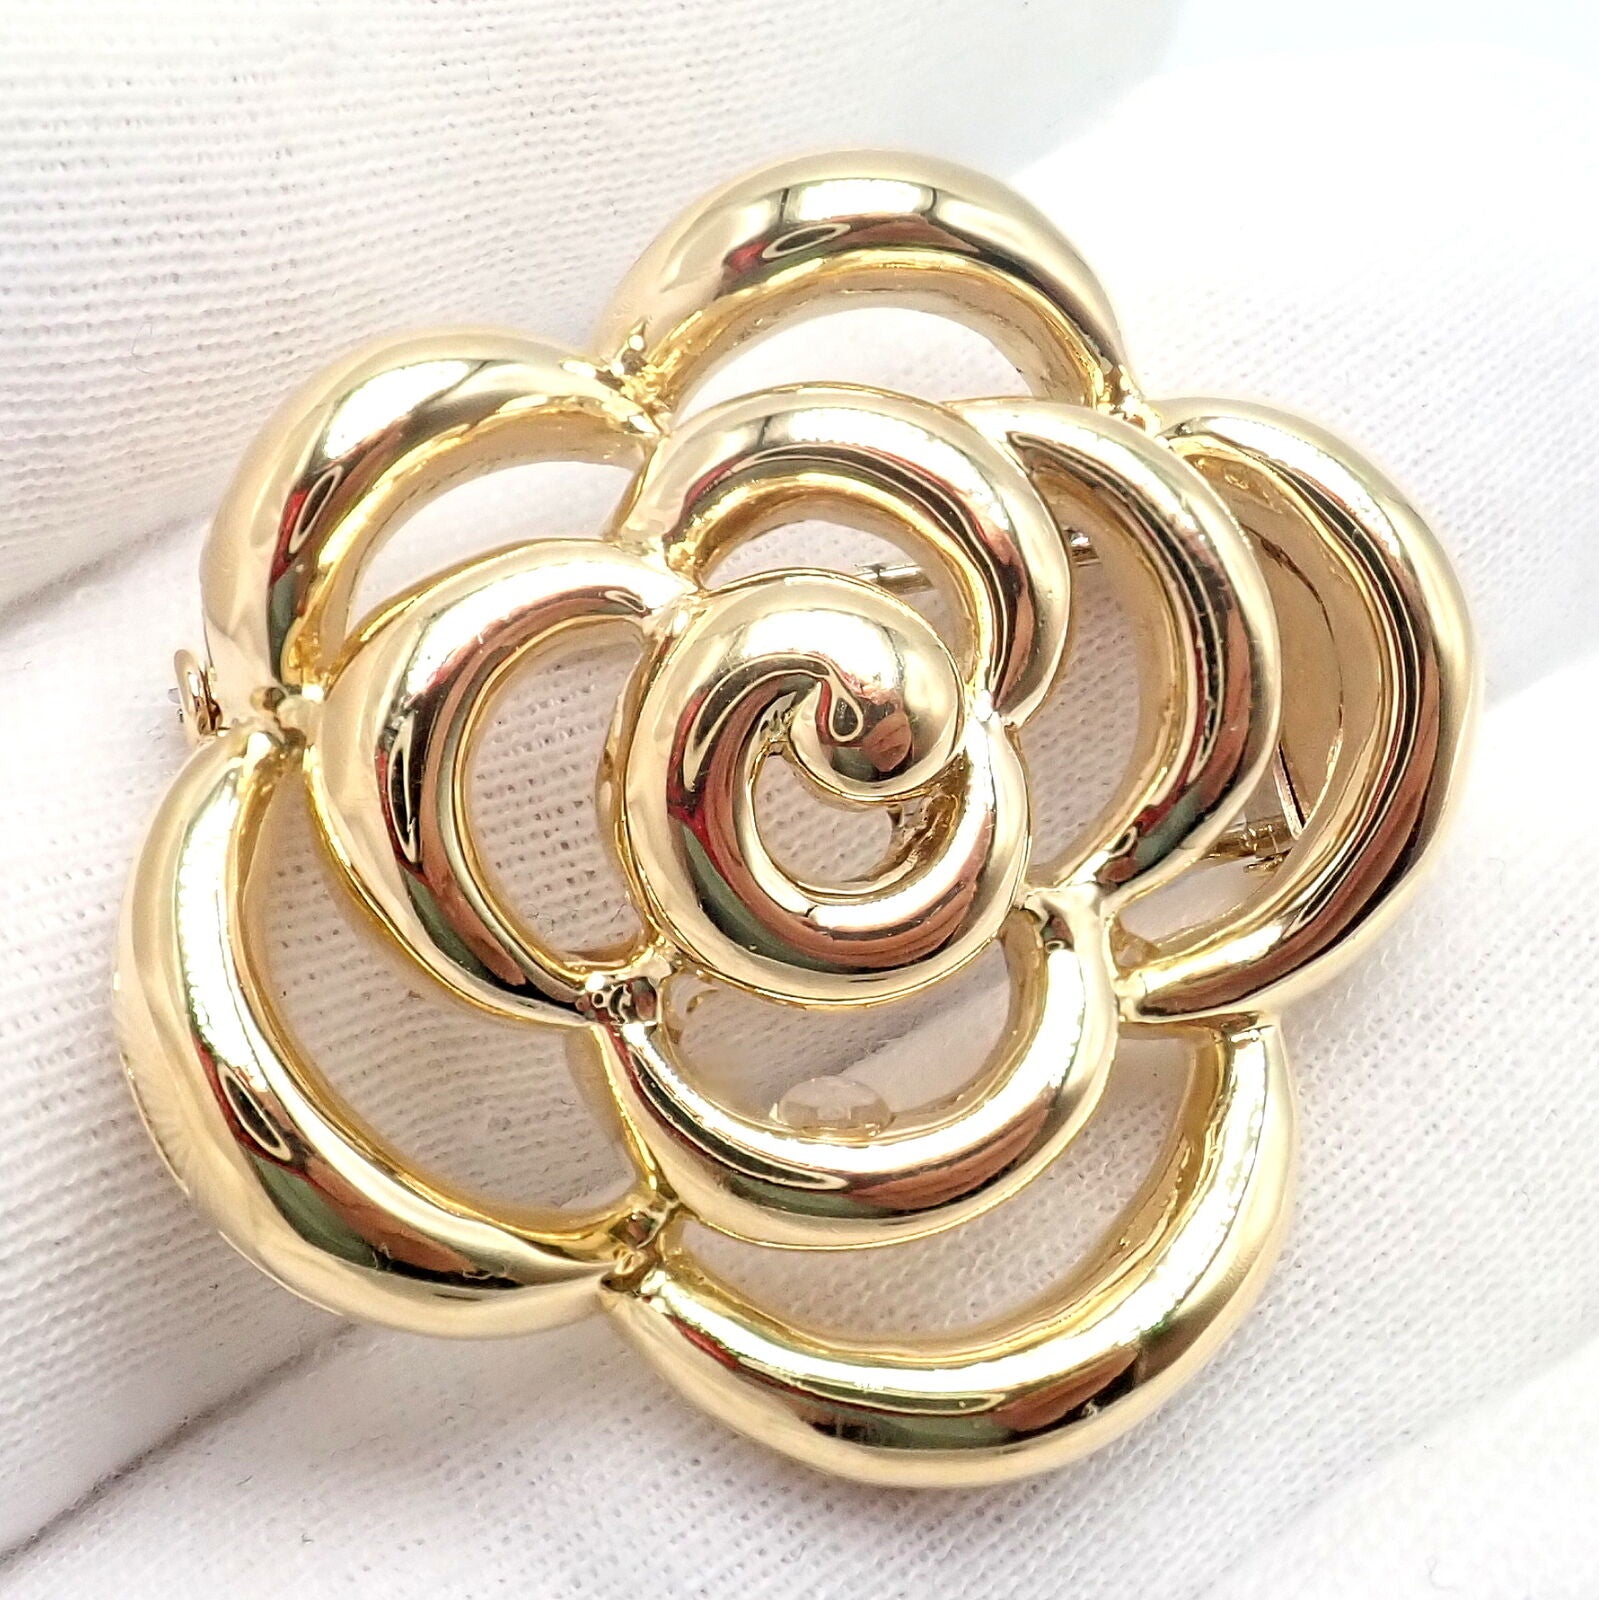 Van Cleef & Arpels Jewelry & Watches:Fine Jewelry:Brooches & Pins Authentic Van Cleef & Arpels 18k Yellow Gold Camellia Flower Pin Brooch 1998